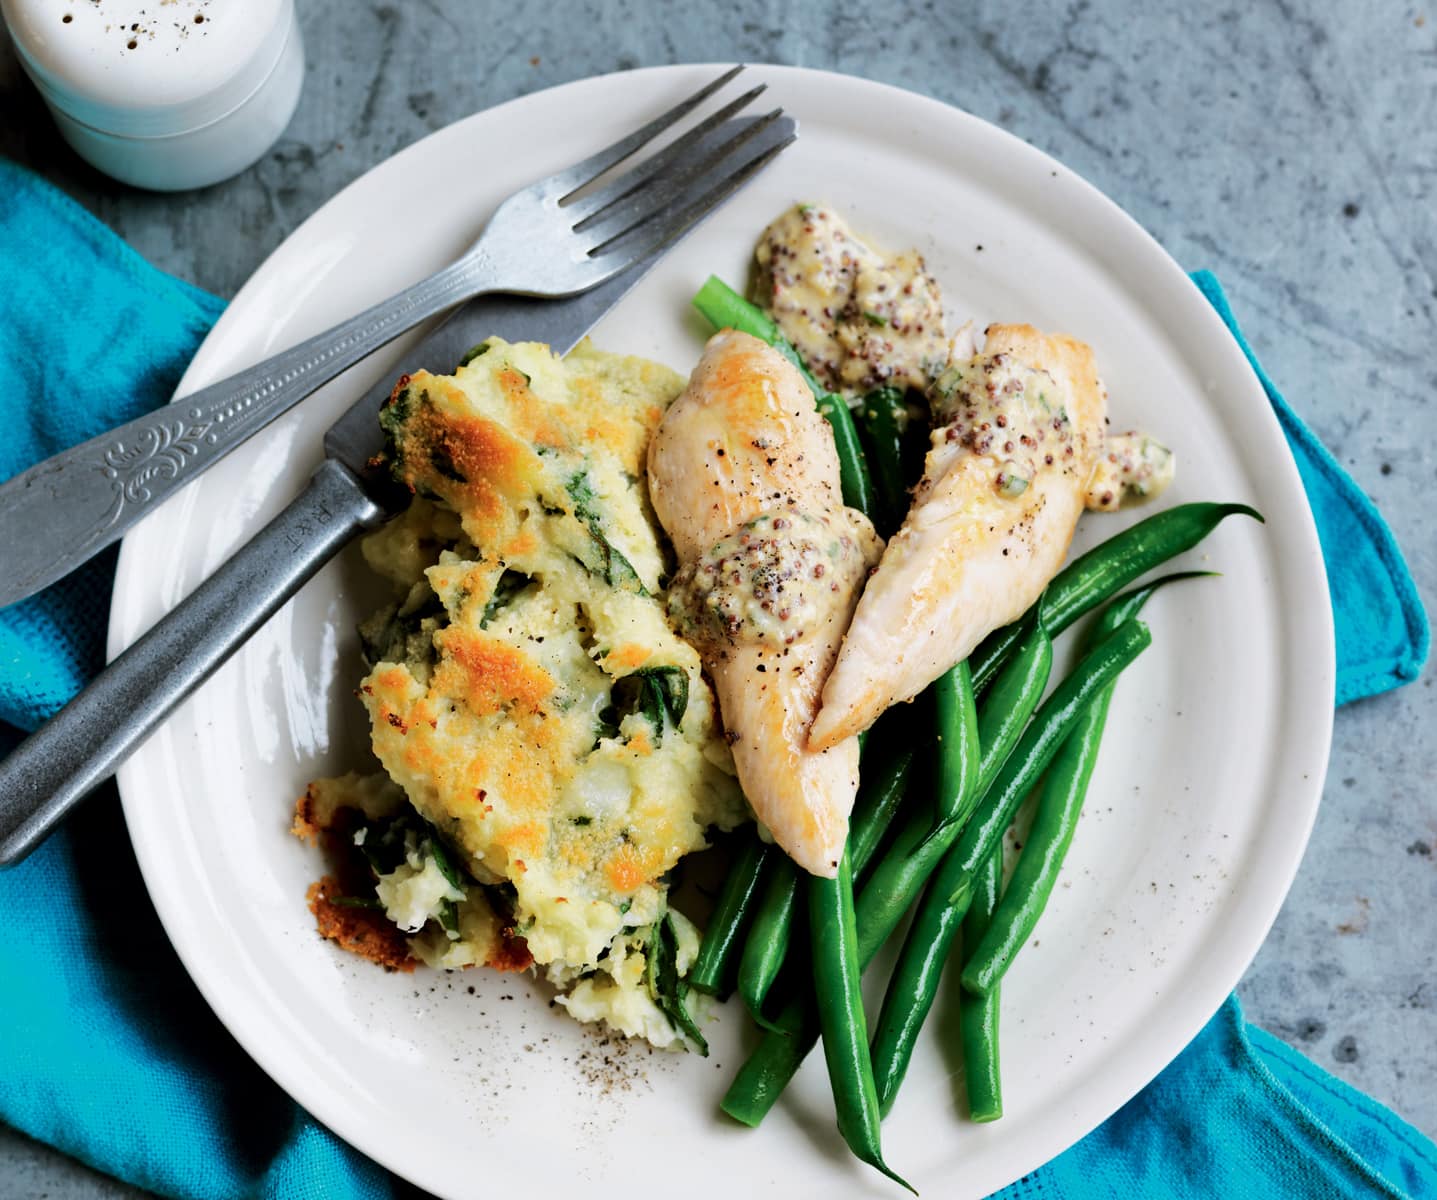 Grilled chicken and mash gratin with mustard sauce - Healthy Food Guide